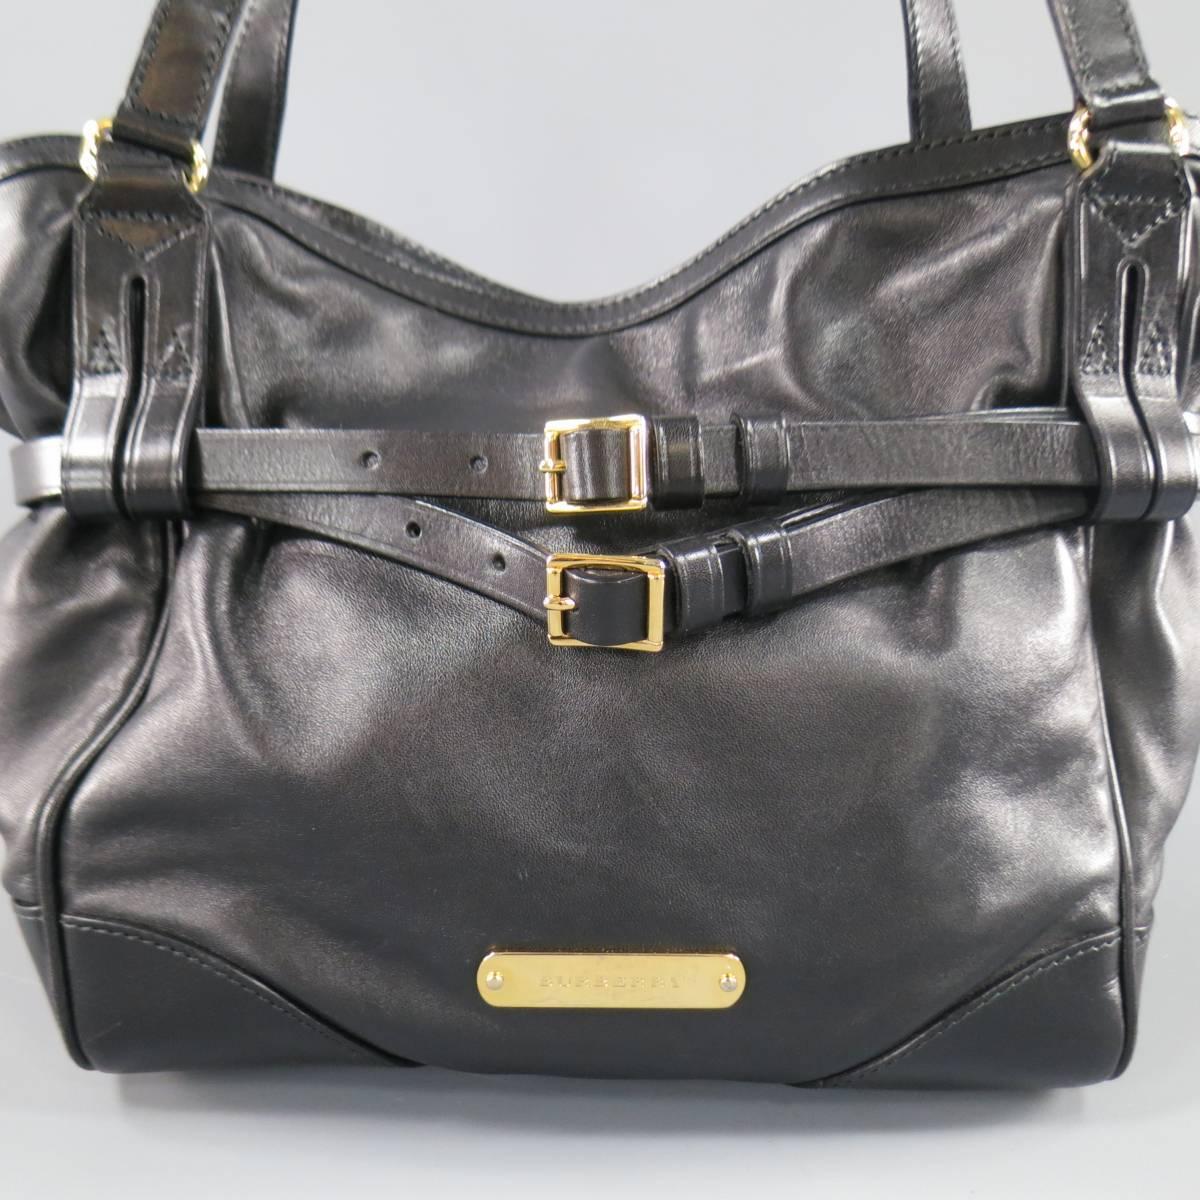 This unique BURBERRY tote bag comes in soft black leather and features a gold tone engraved logo plaque, double top handles, cinched top with double skinny belts, snap closure, and signature plaid interior. Made in Italy.
 
Excellent Pre-Owned